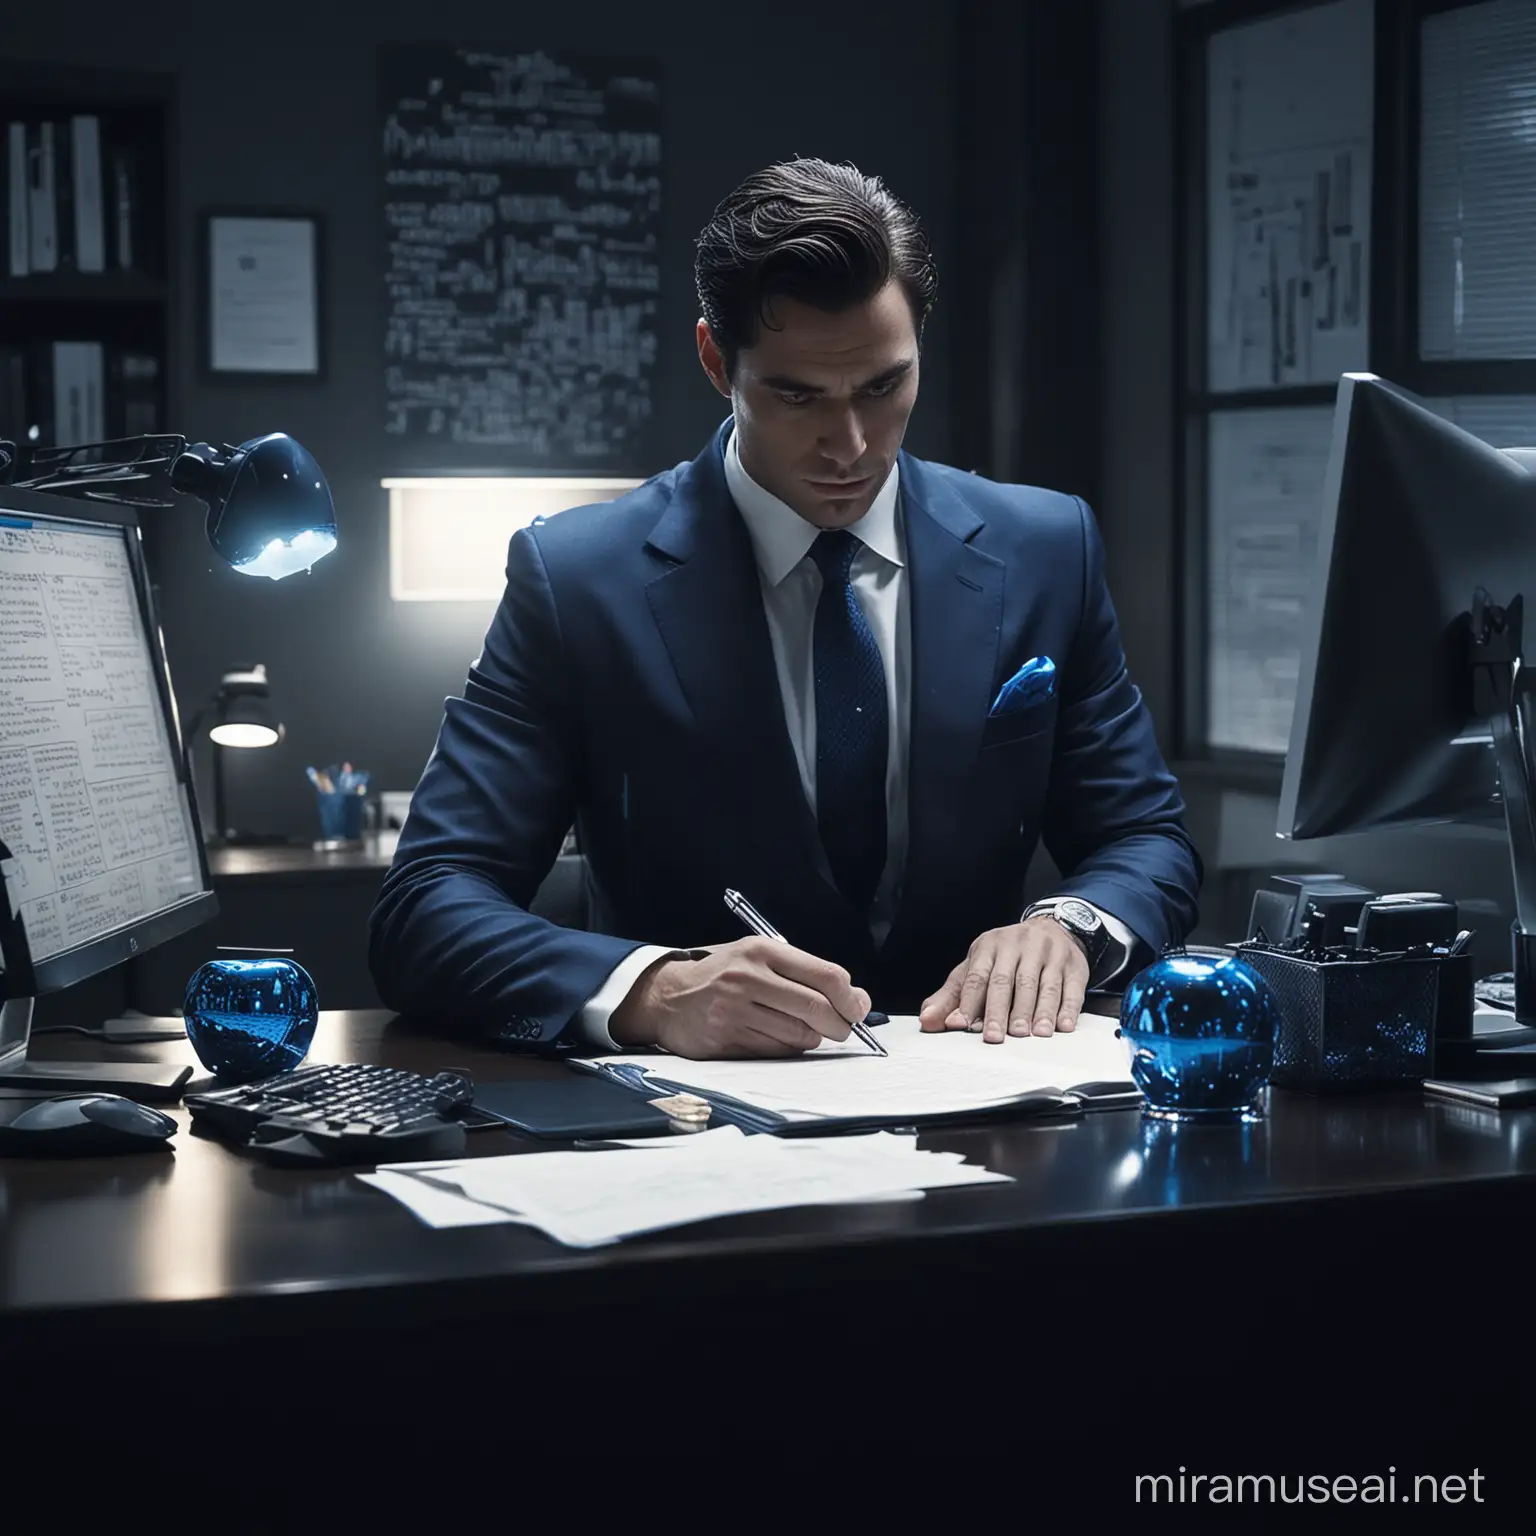 Serious Businessman in Luxurious Midnight Office with Handwritten Document